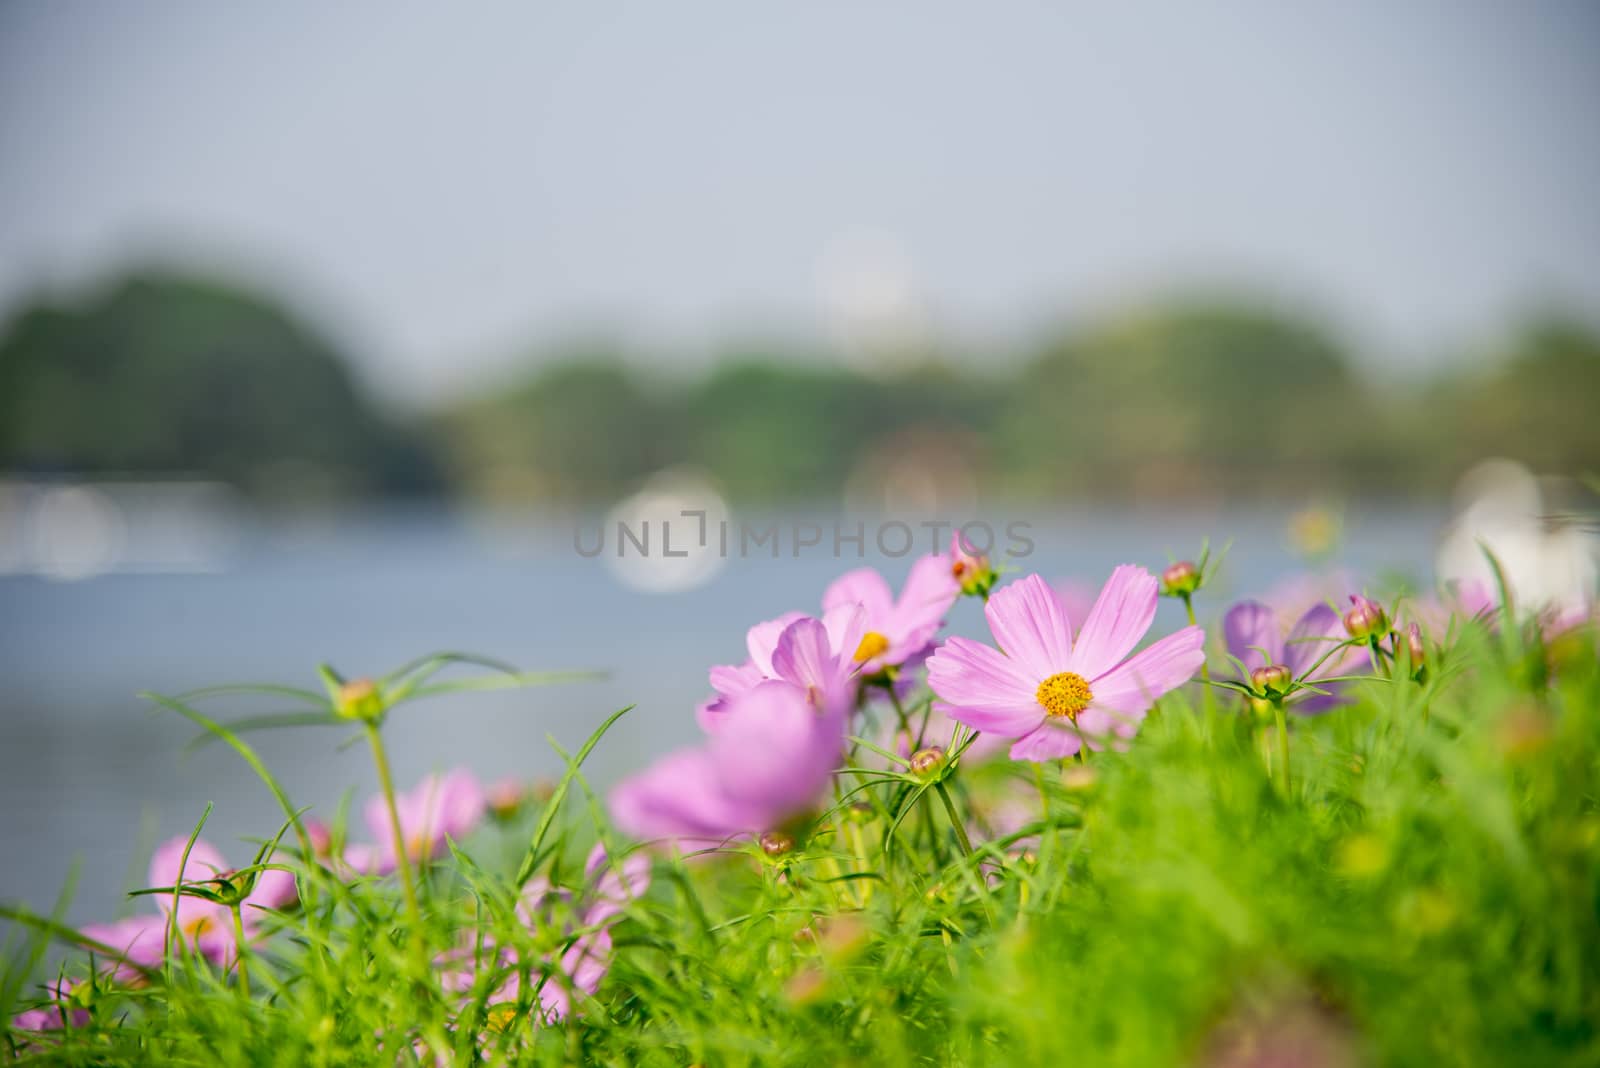 Purple cosmos flower in the park2